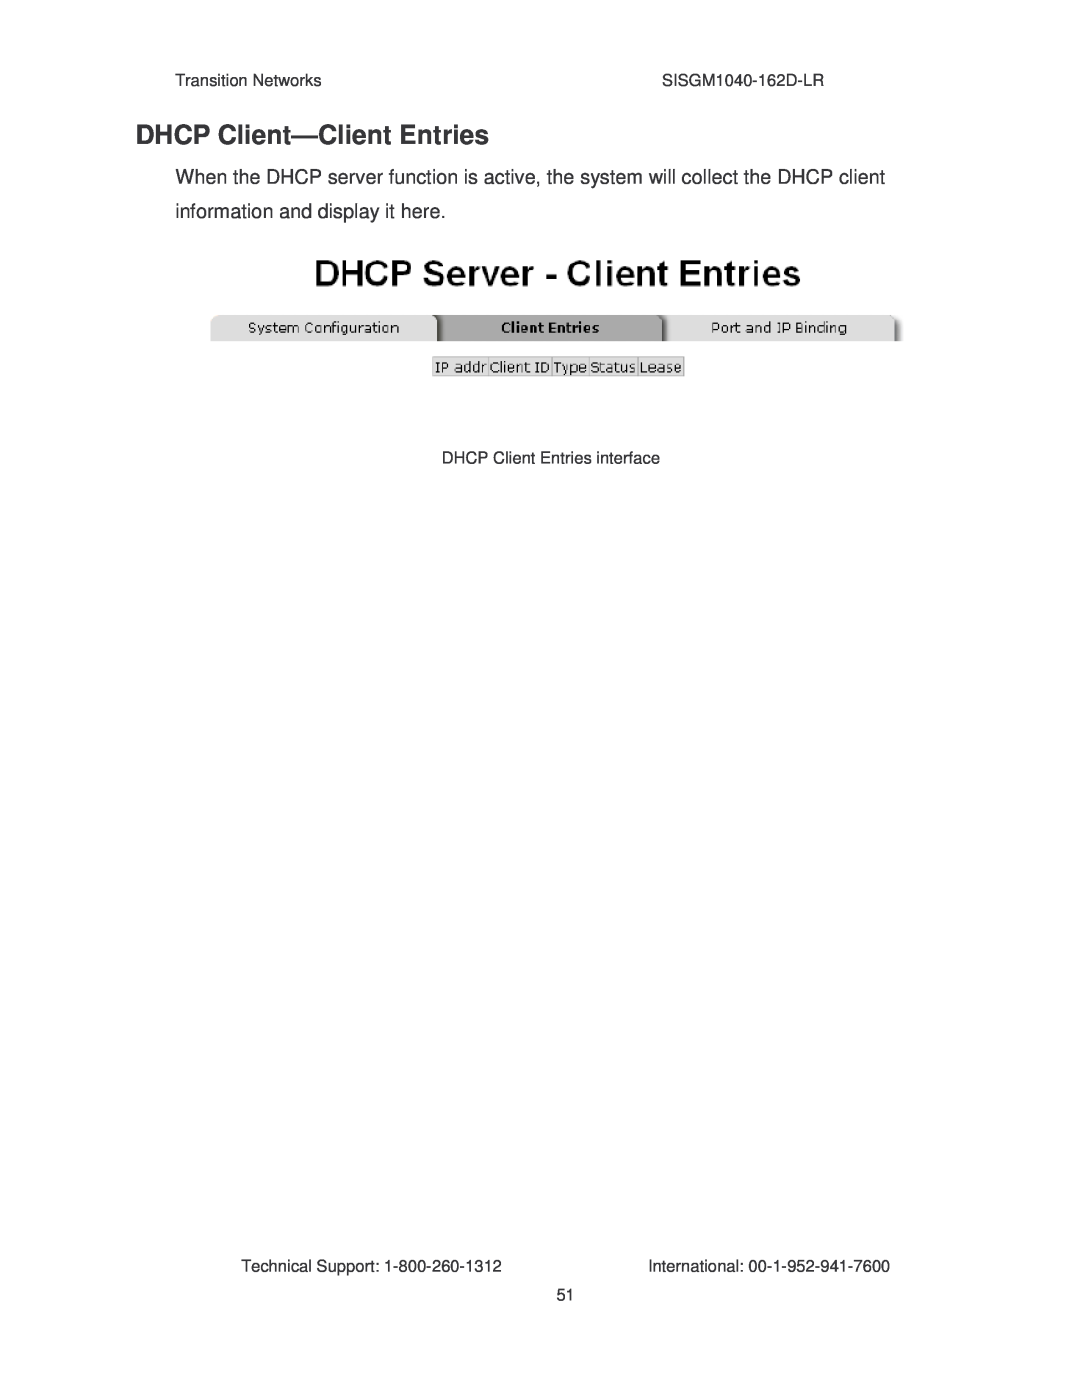 Transition Networks DHCP Client-Client Entries, Transition Networks, SISGM1040-162D-LR, DHCP Client Entries interface 